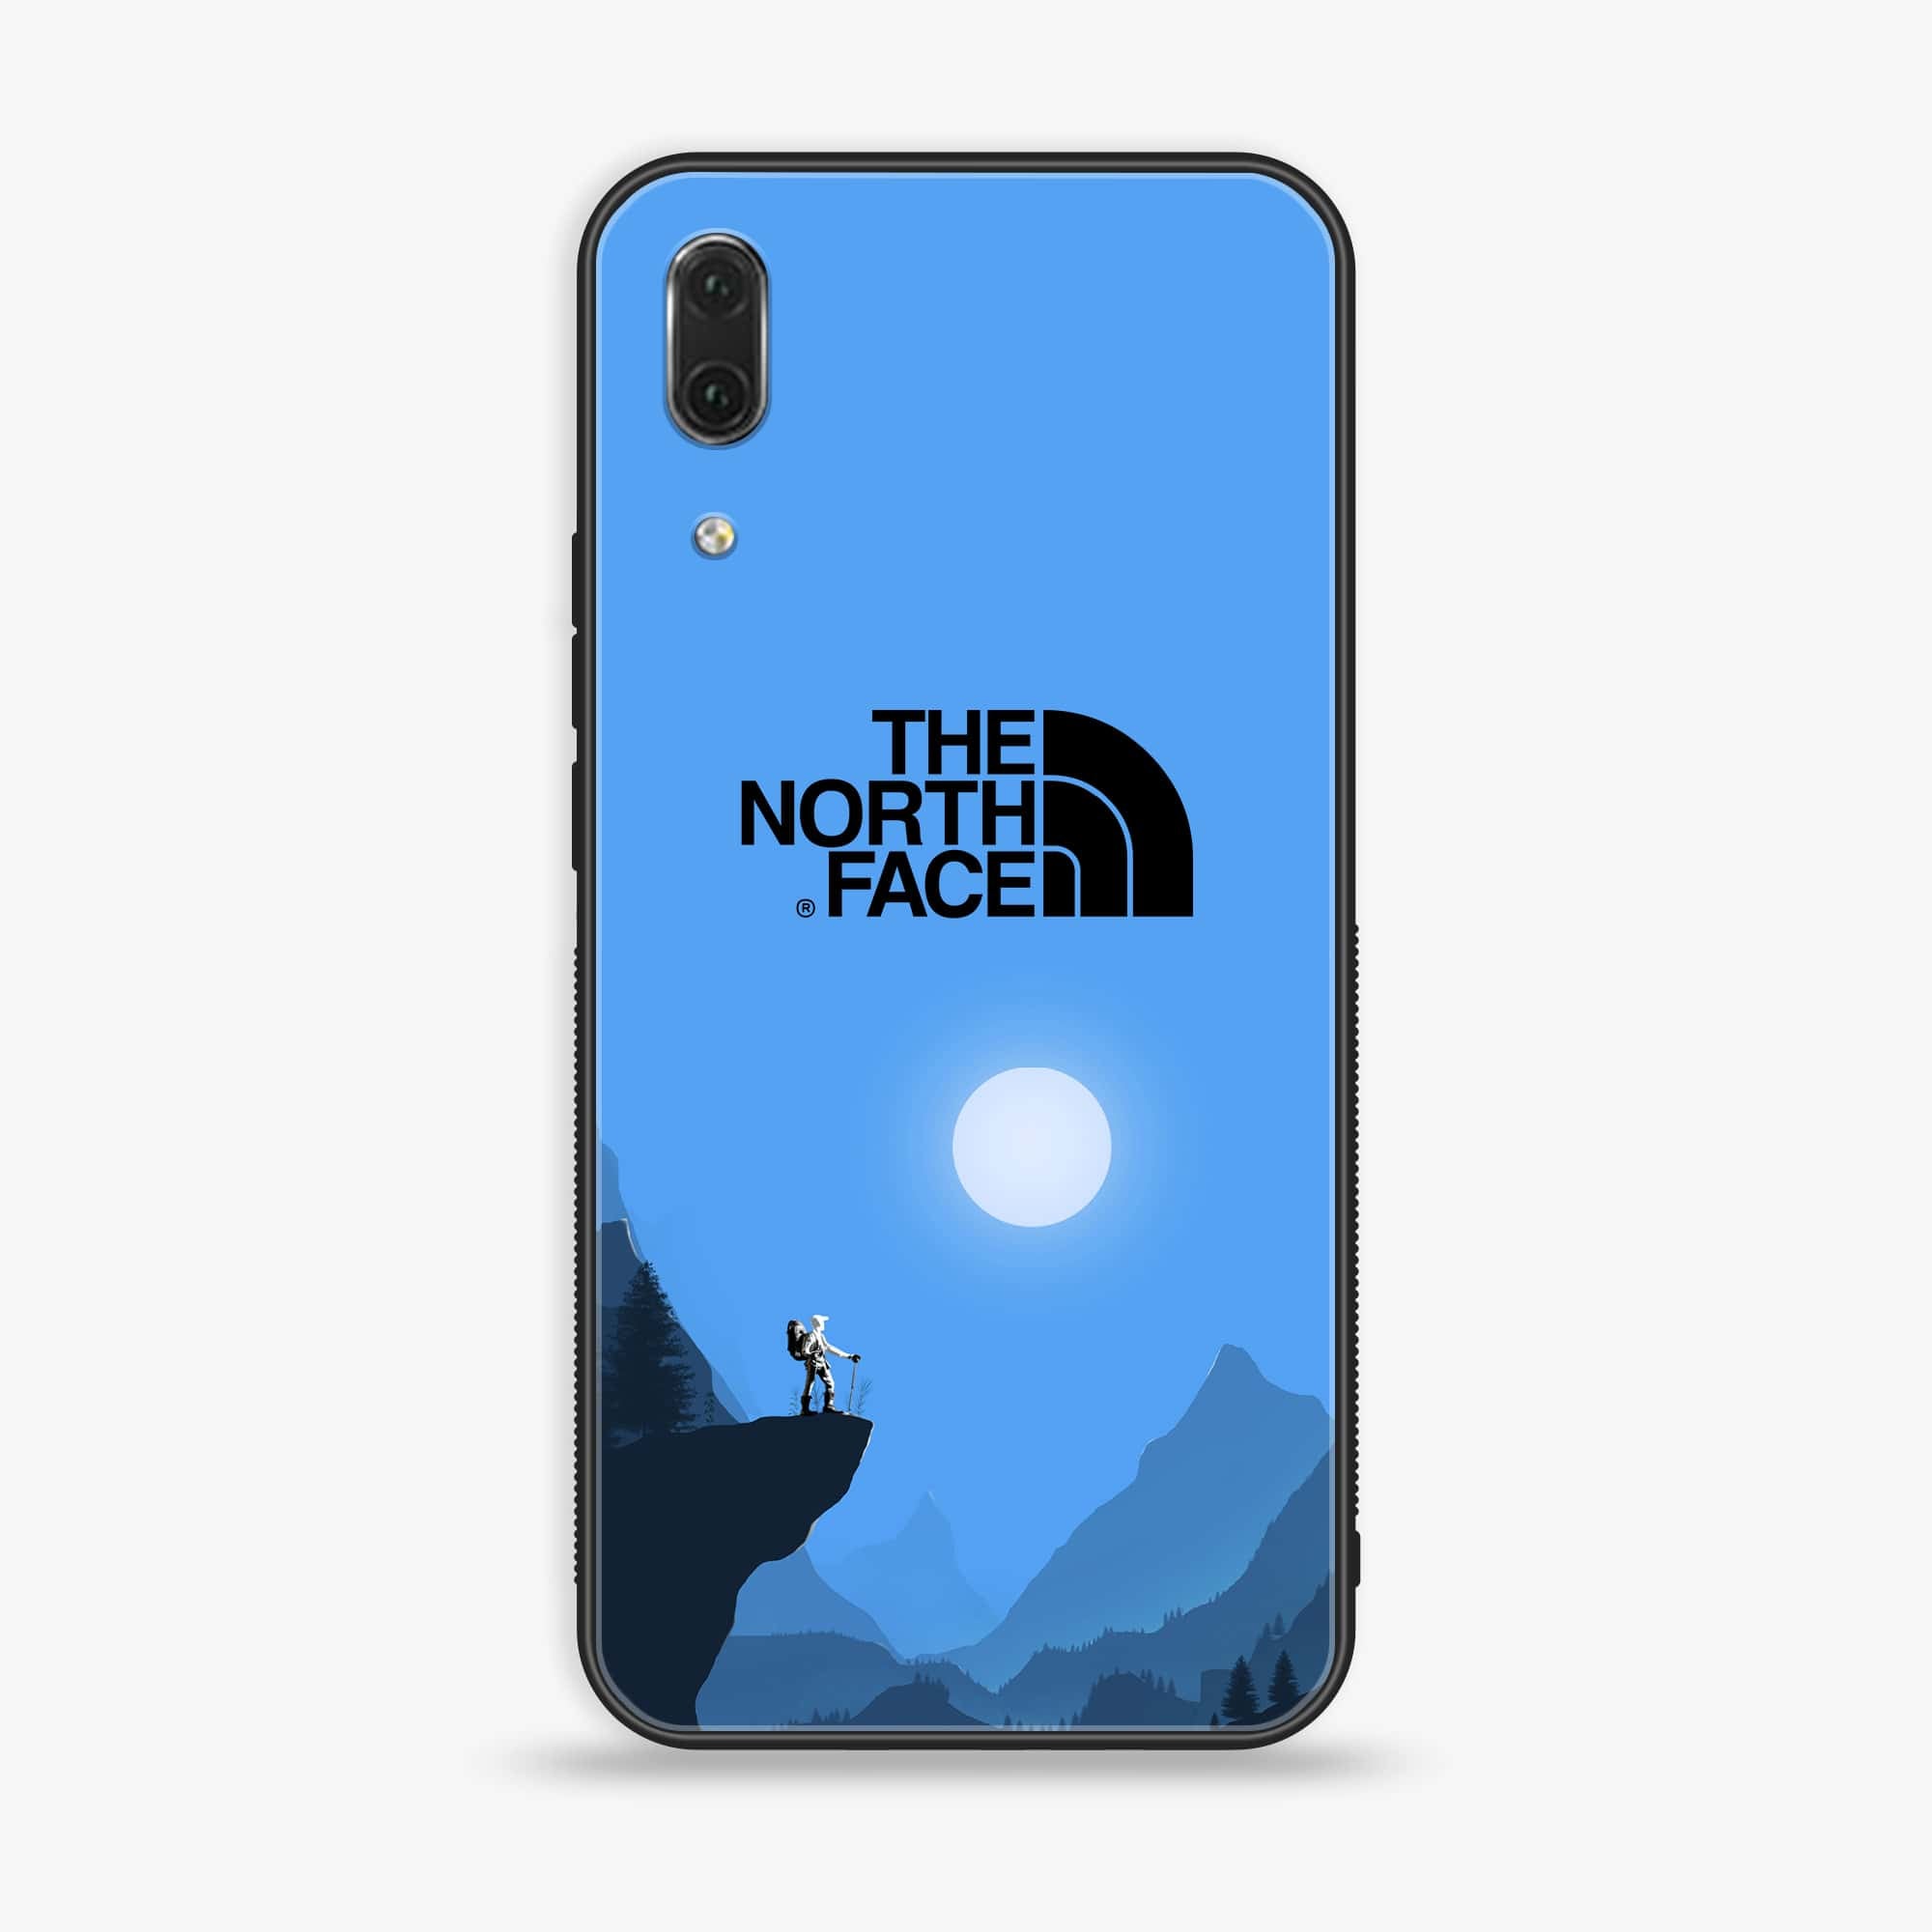 Huawei P20 - The North Face Series - Premium Printed Glass soft Bumper shock Proof Case